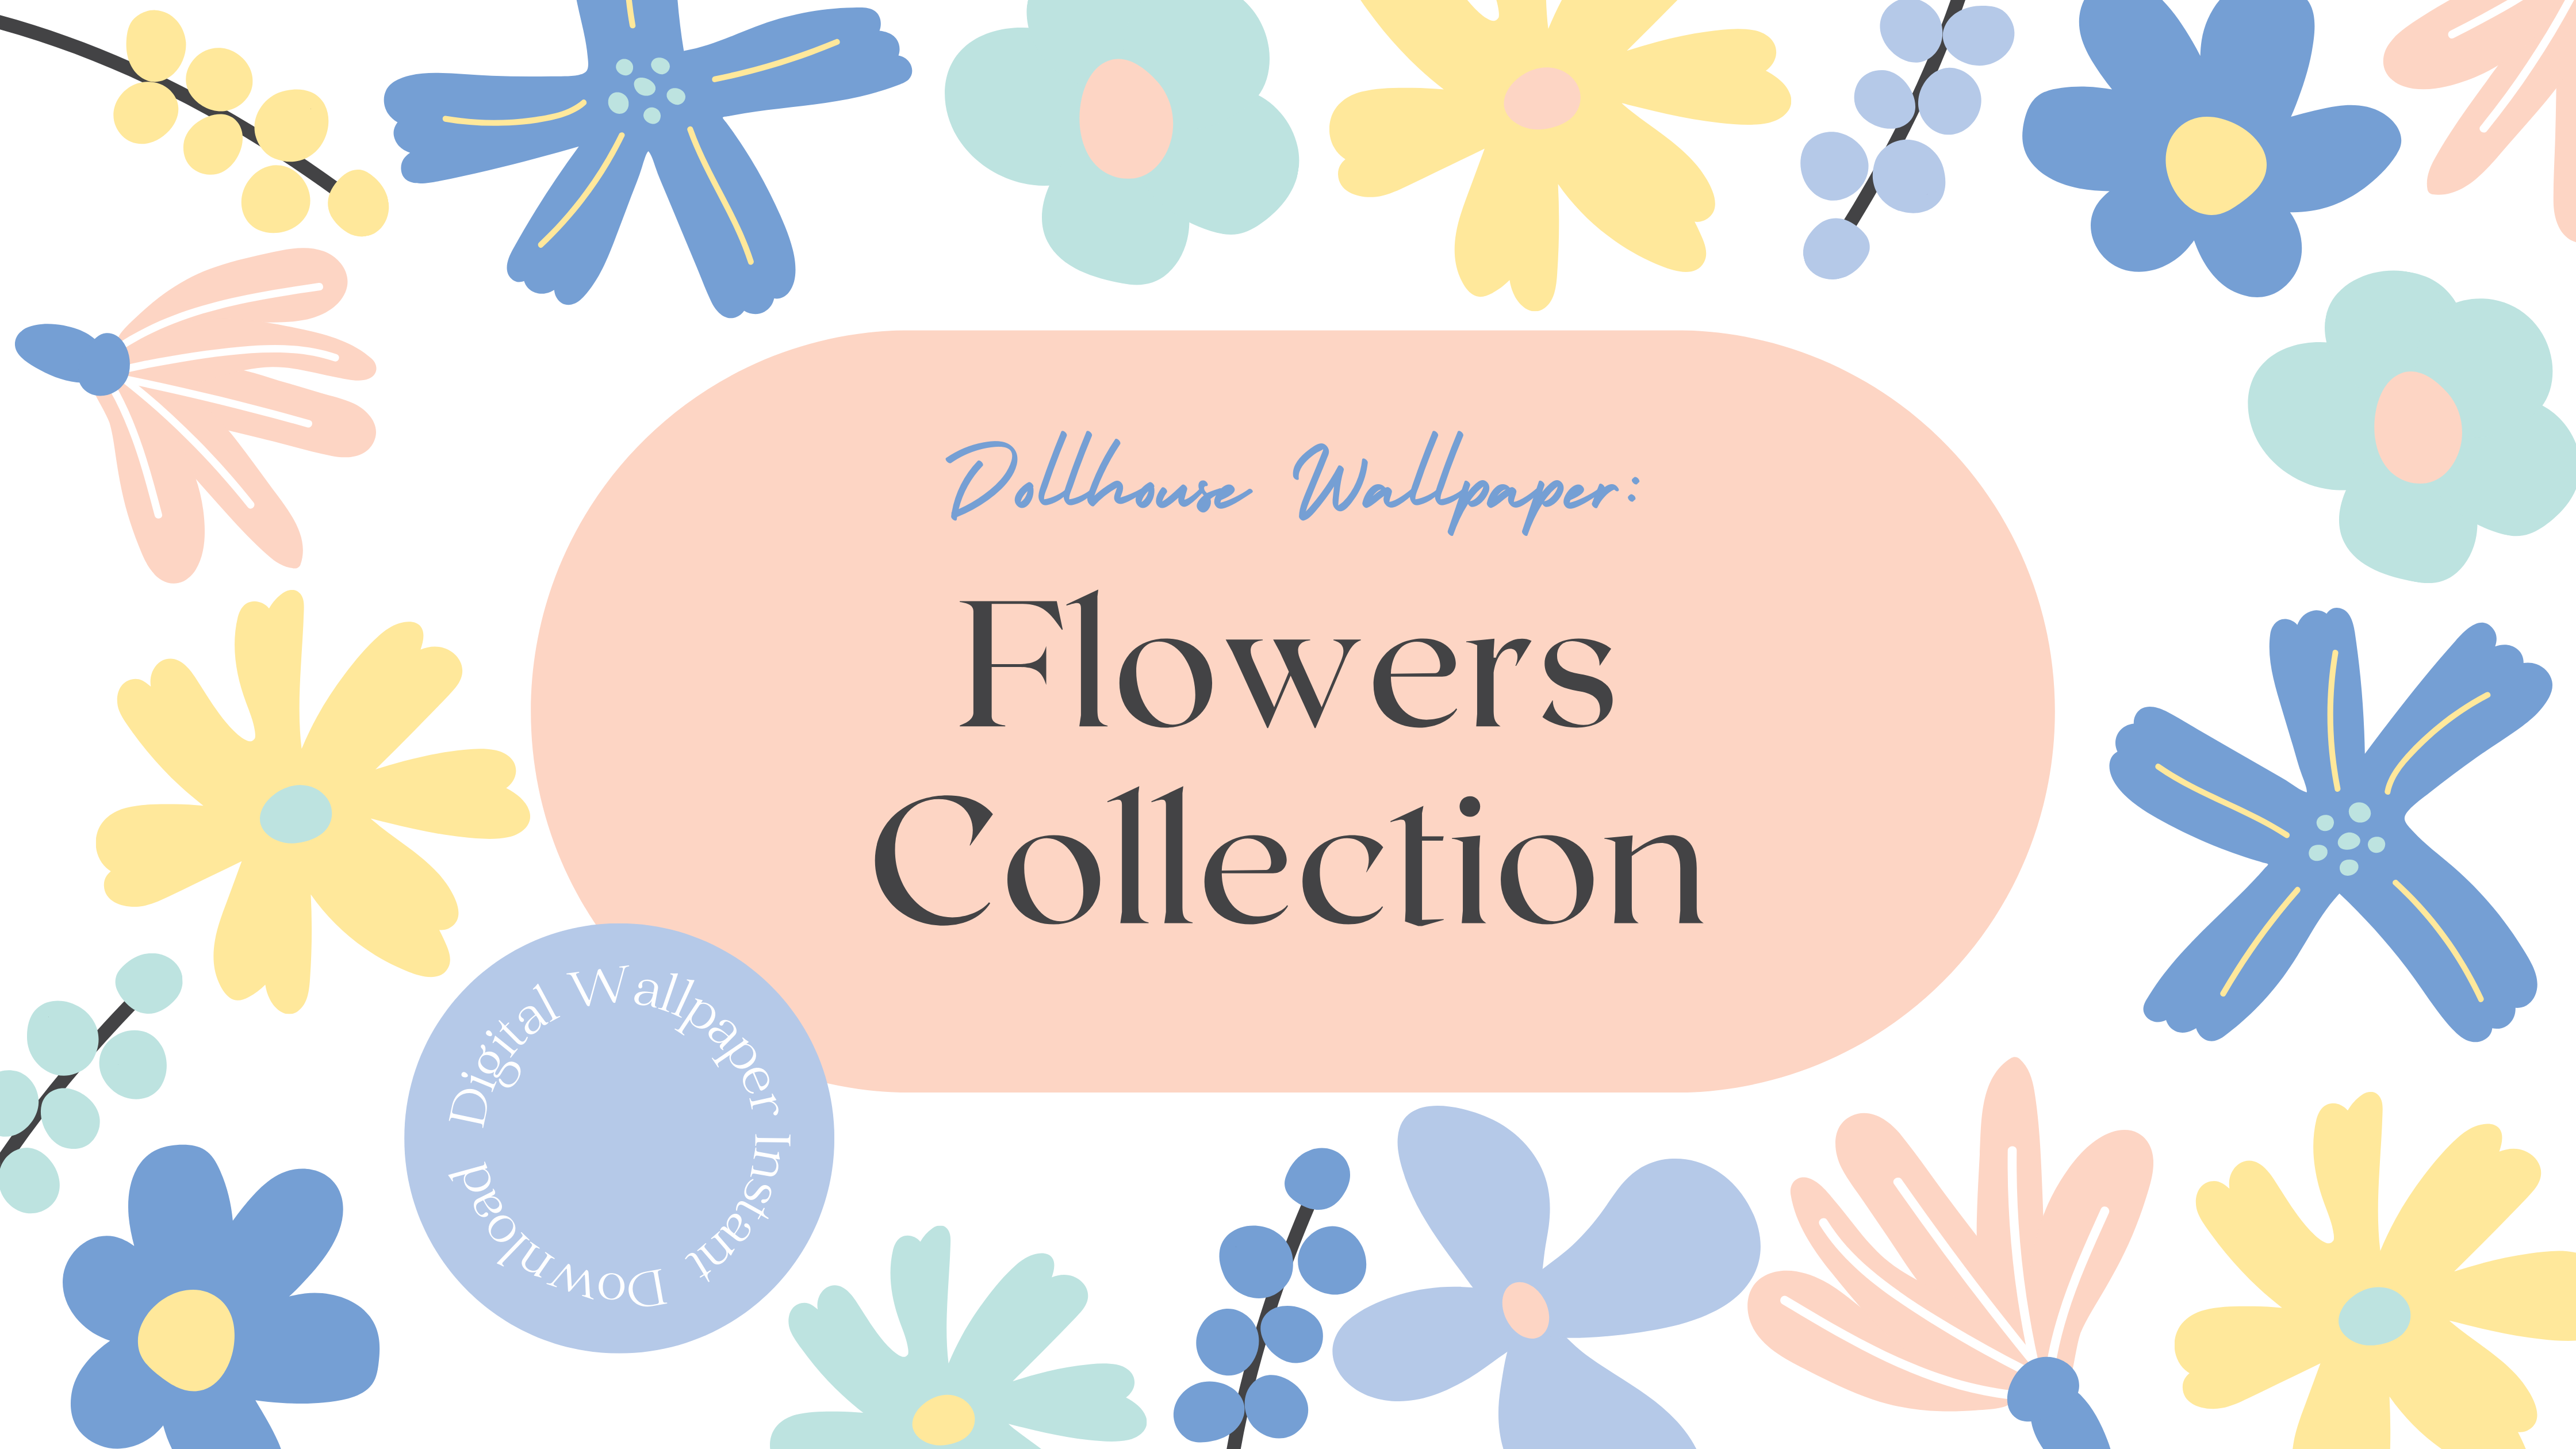 Dollhouse Wallpaper Flowers Collection – Lovely Little House